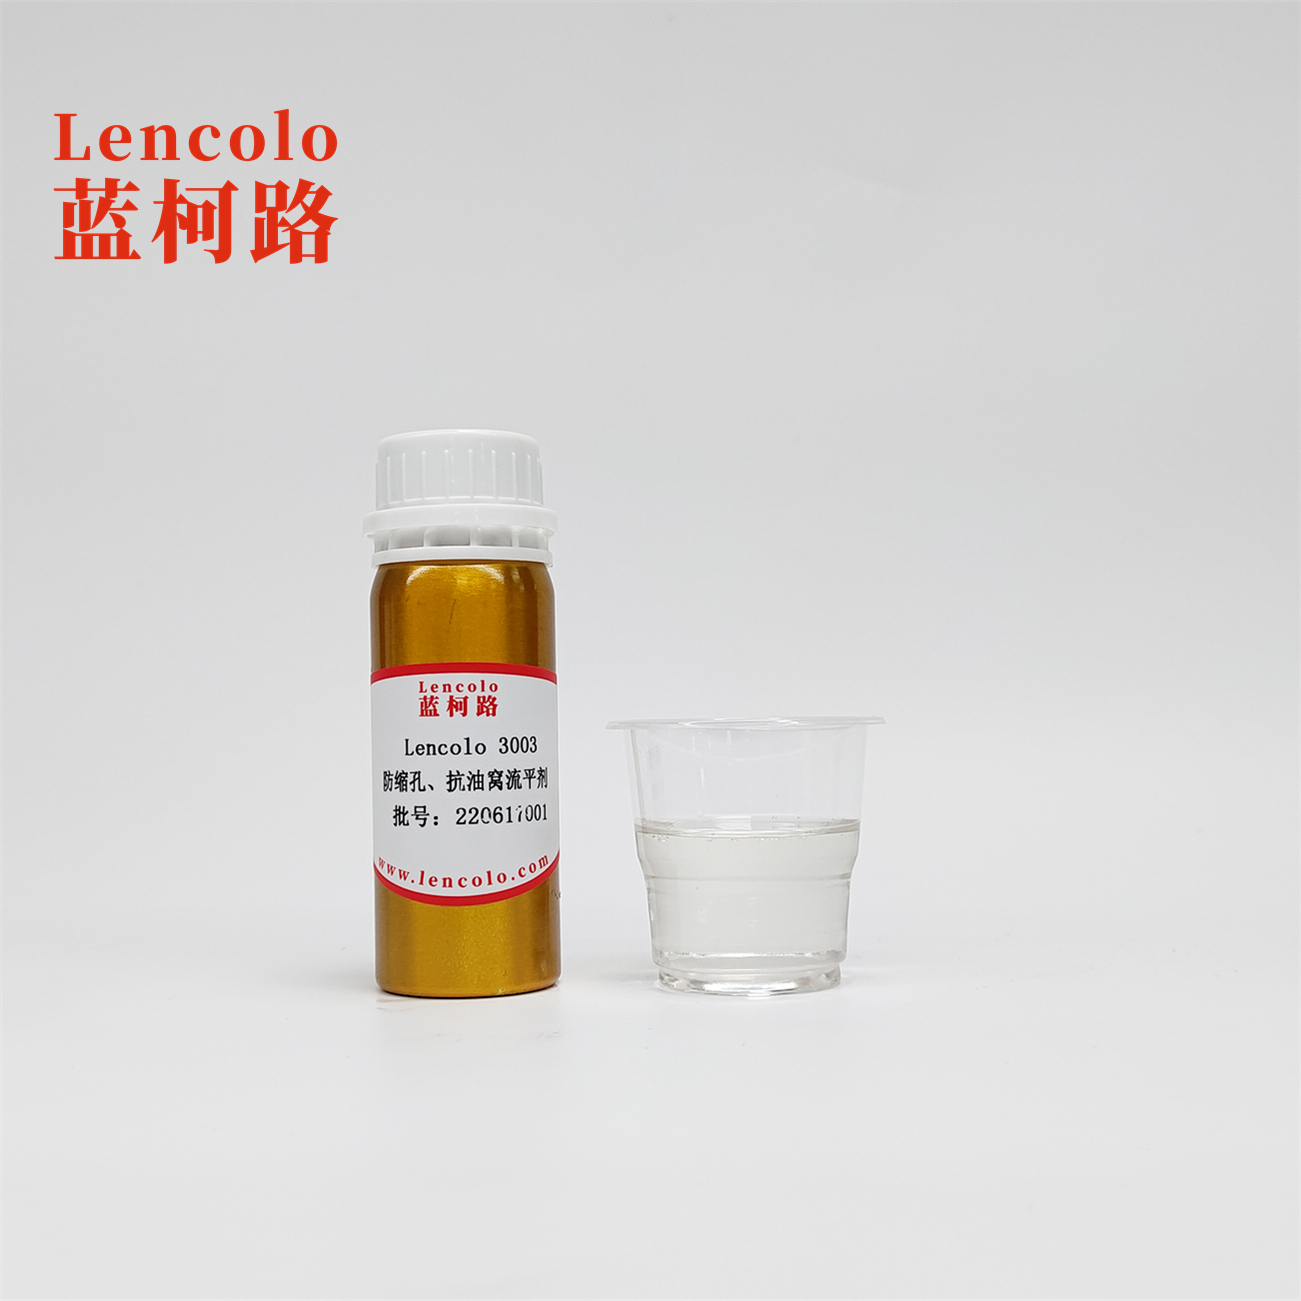 Lencolo 3003  Anti-cratering leveling agent  has good oil resistance for  Industrial Coatings, UV Coatings